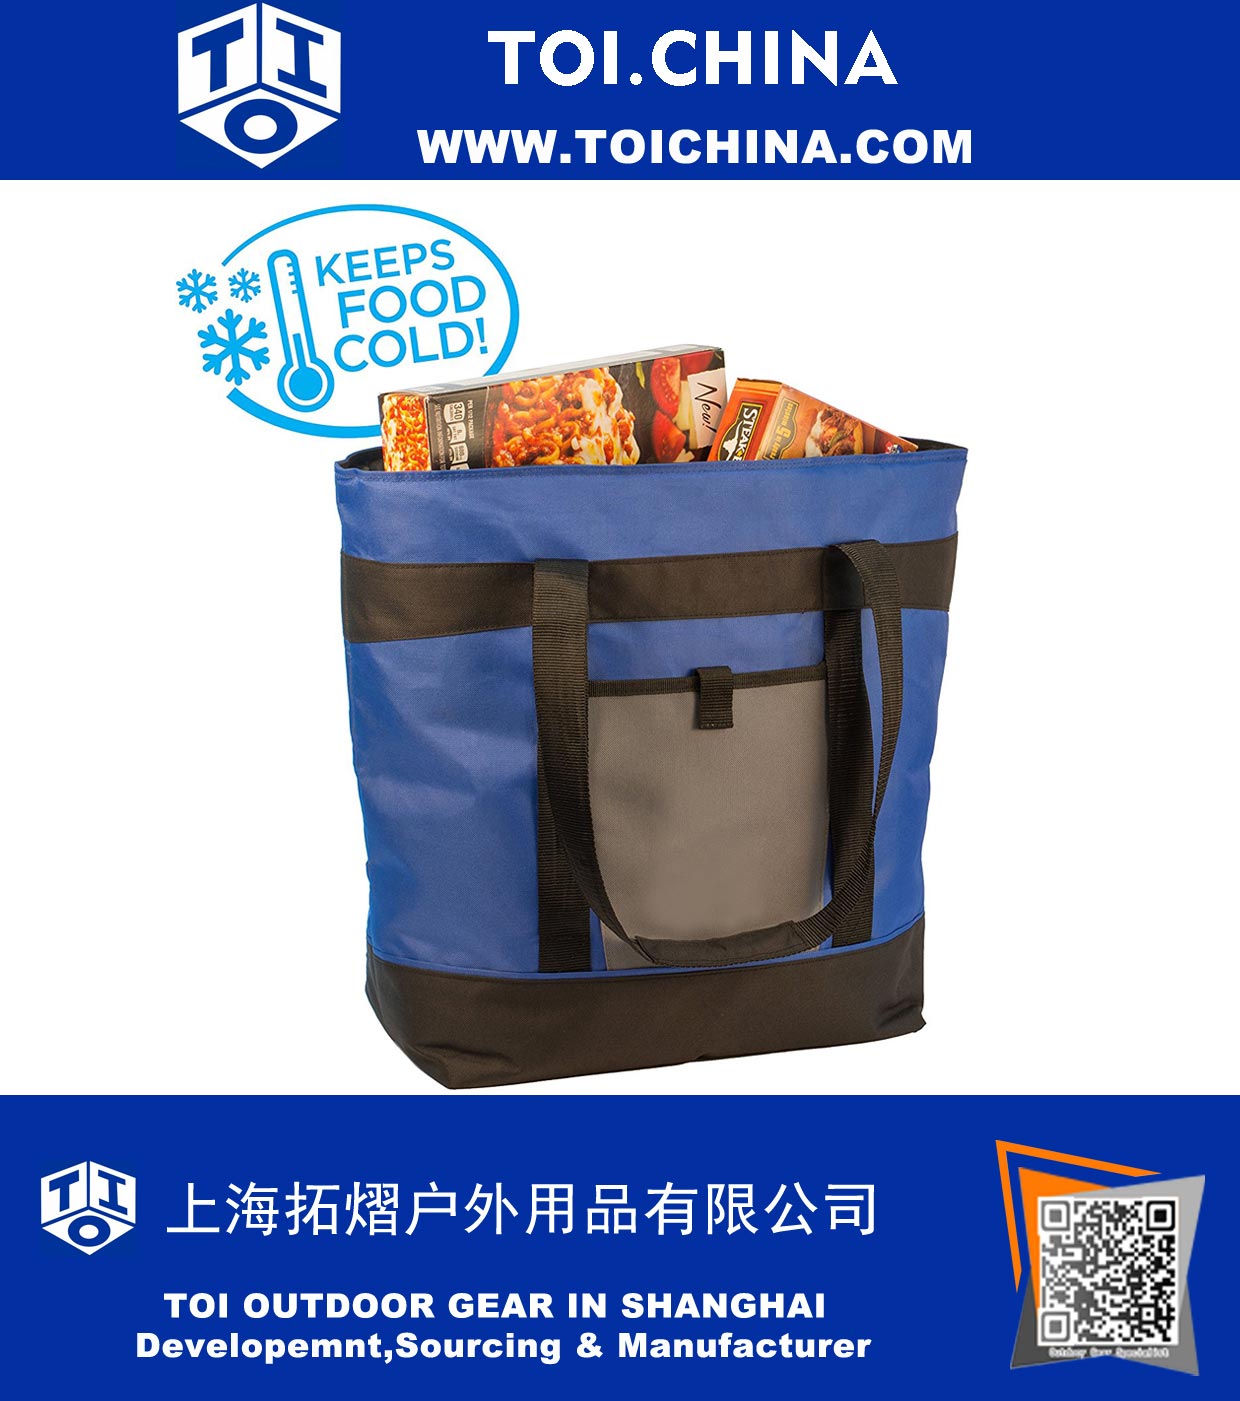 Insulated Grocery Bag - Large 10 Gallon Capacity, Soft Sided Cooler with Thick Wall Insulation - Perfect for Hot or Cold Food